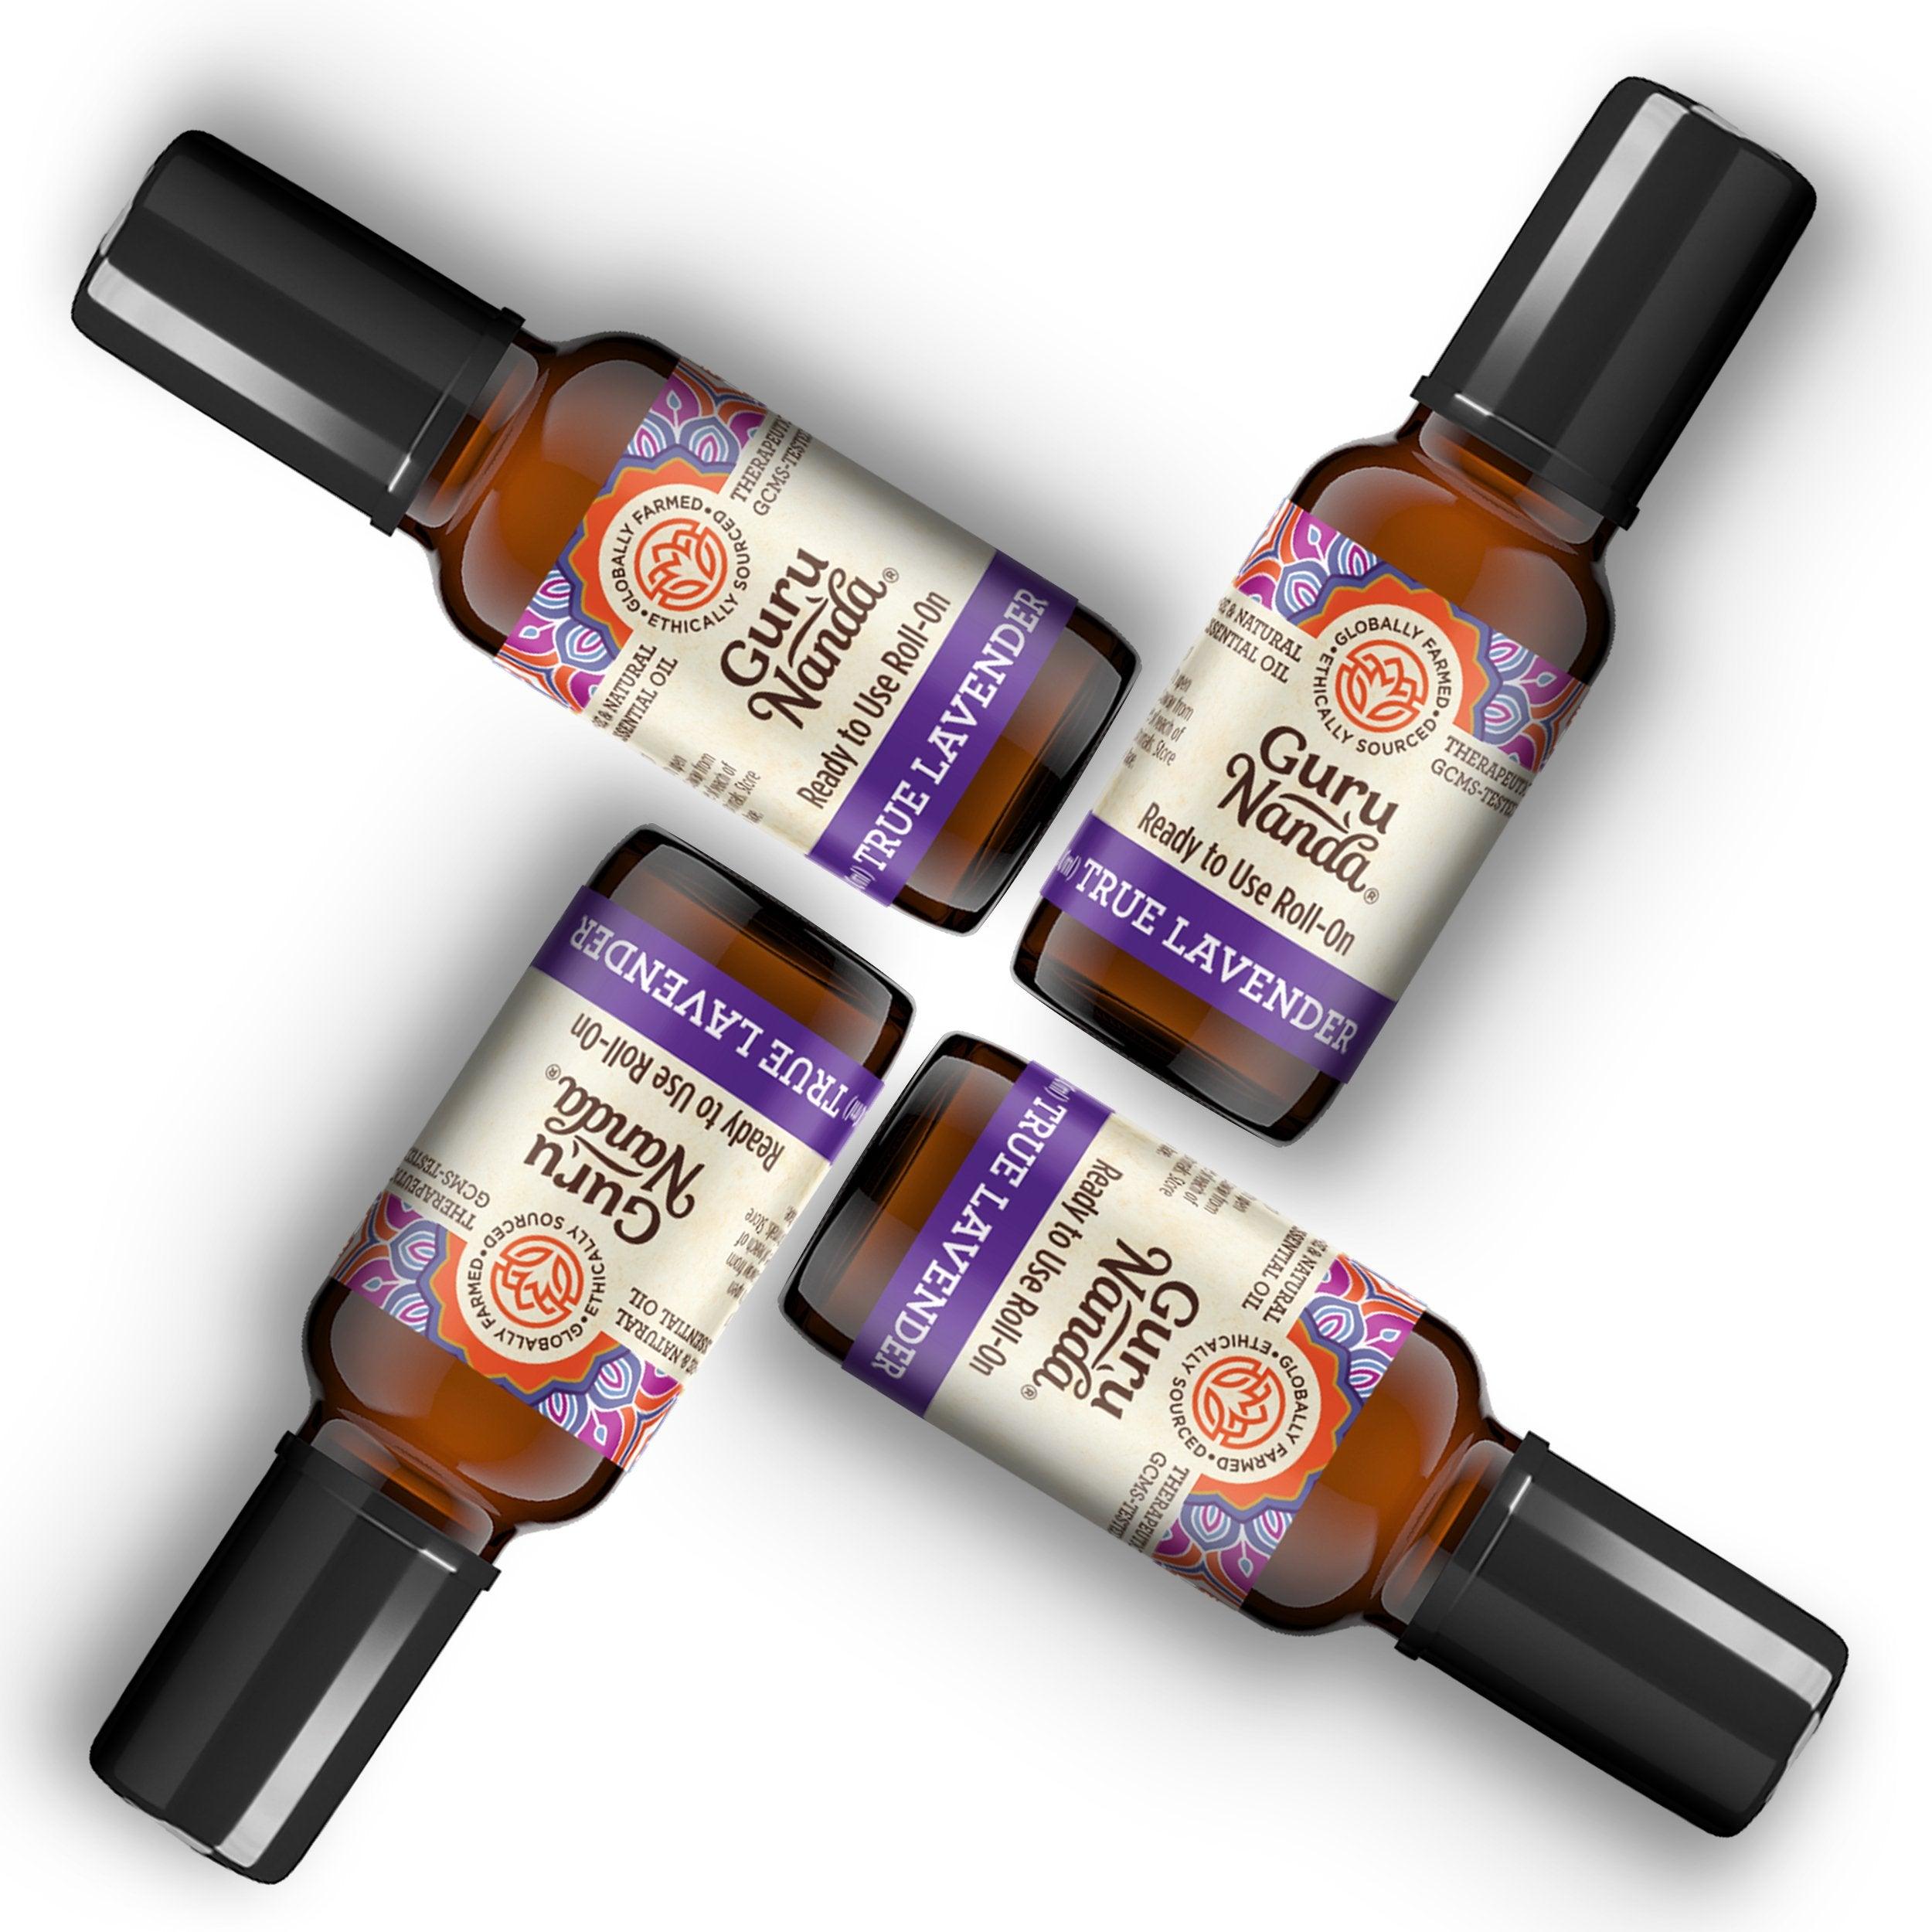 Gurunanda Sleep Essential Oil Set (Pack of 3 x 0.34 fl oz) - 100% Pure, Natural & Undiluted Cedarwood, Frankincense & Lavender Aromatherapy Oils for